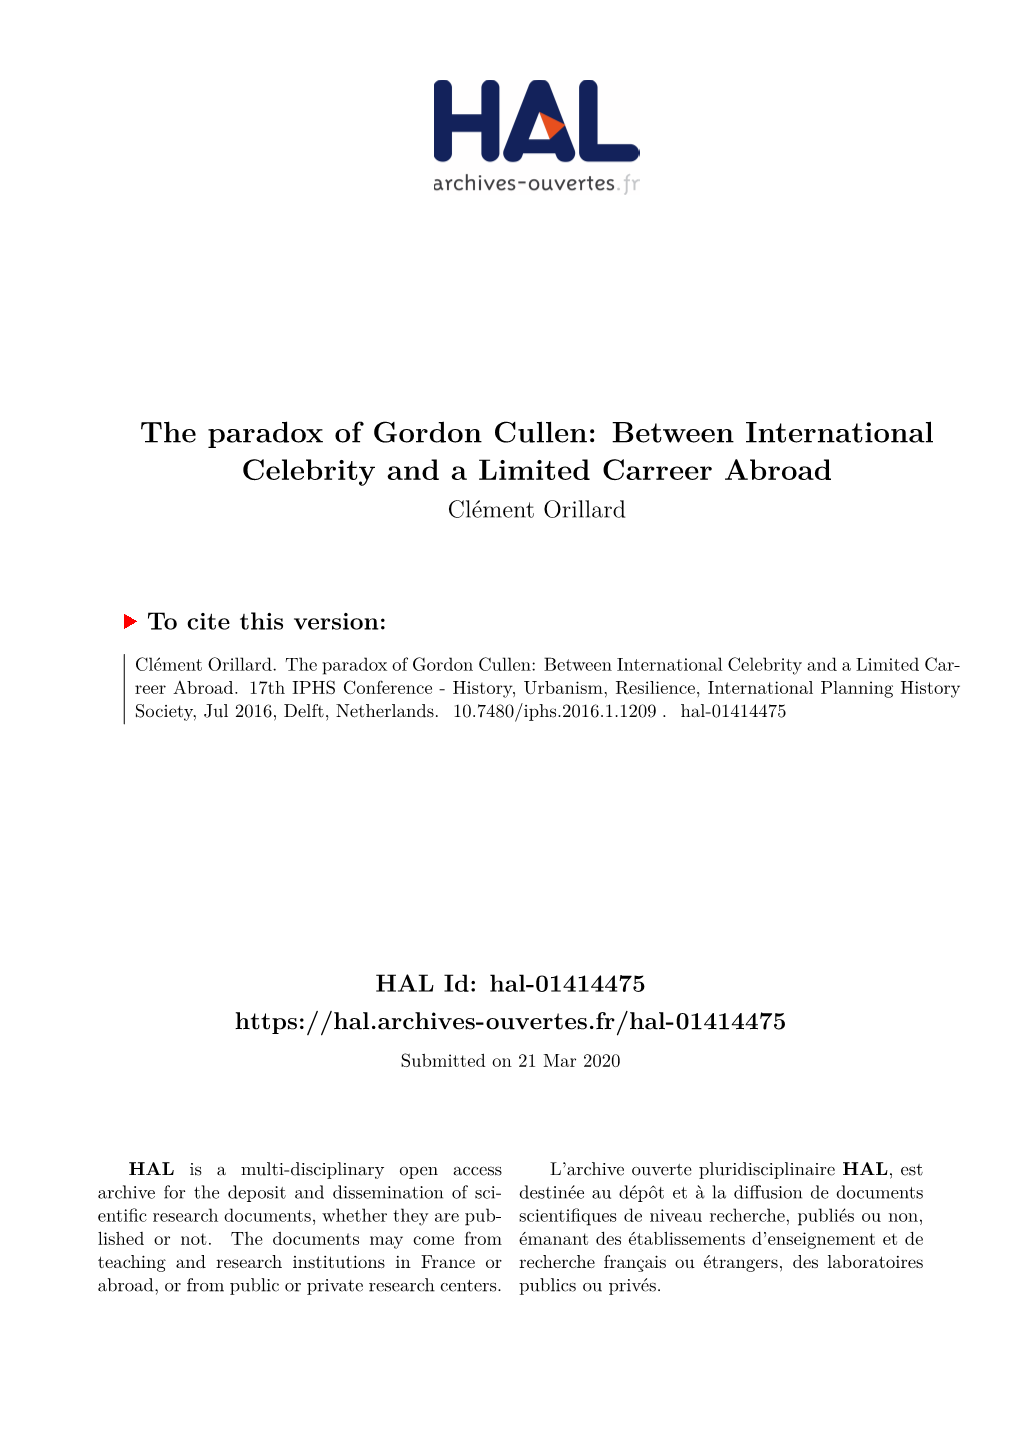 The Paradox of Gordon Cullen: Between International Celebrity and a Limited Carreer Abroad Clément Orillard